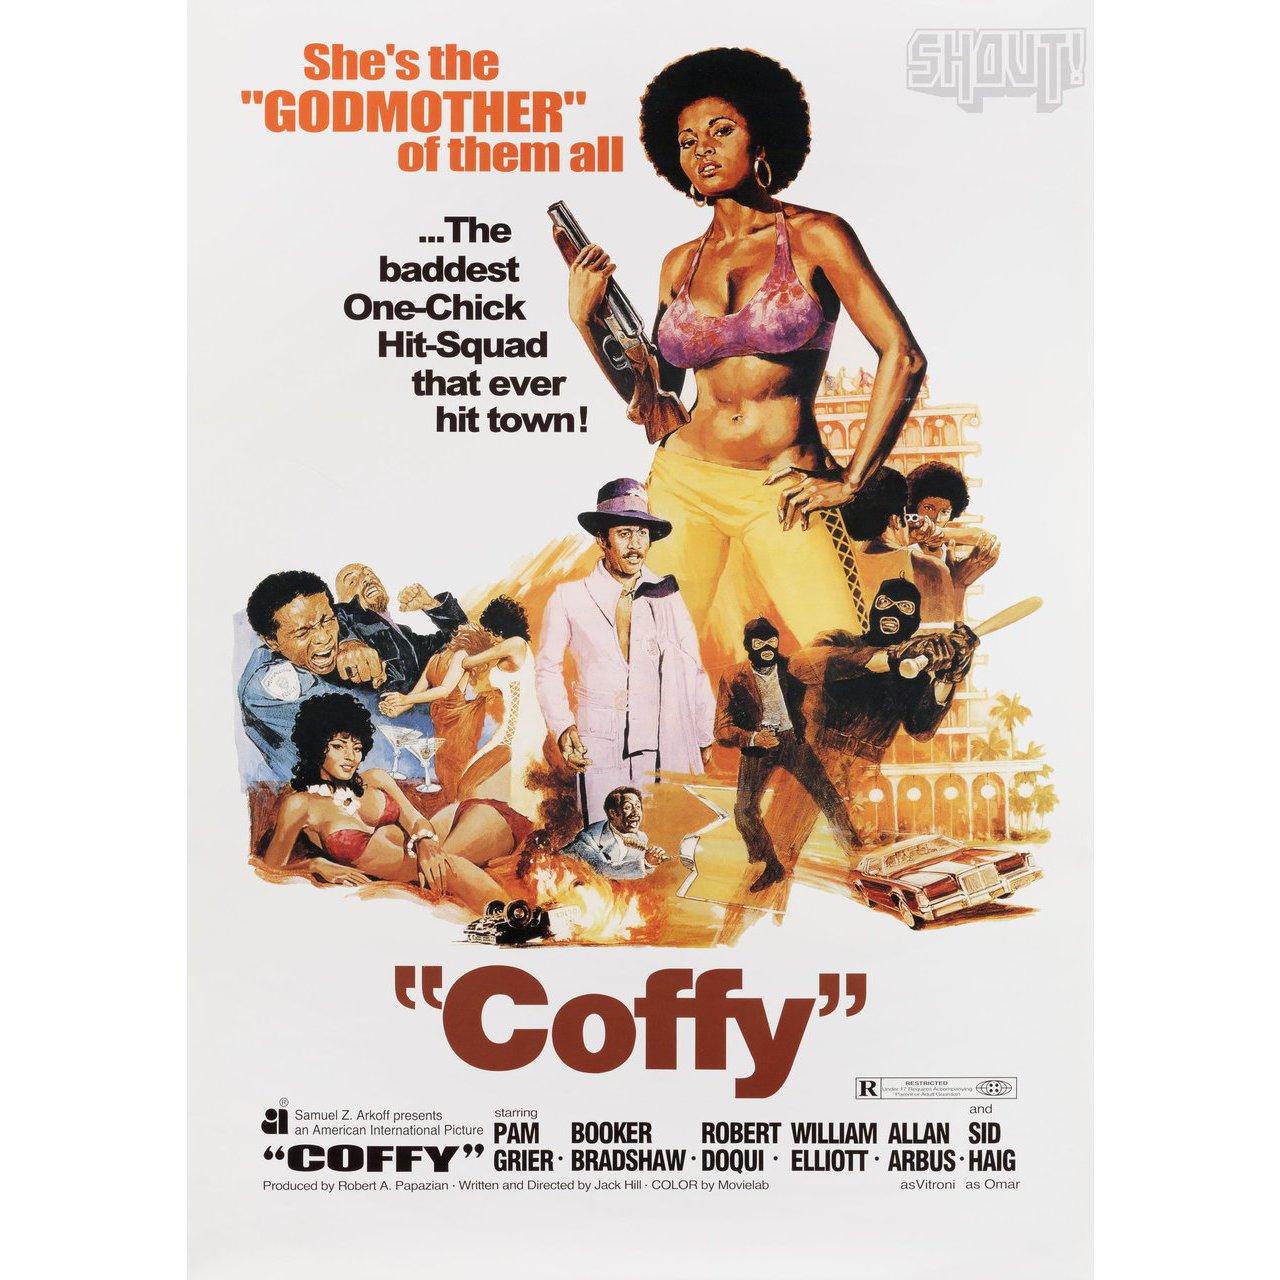 Original 2005 re-release Japanese B2 poster for the 1973 film Coffy directed by Jack Hill with Pam Grier / Booker Bradshaw / Robert DoQui / William Elliott. Very Good-Fine condition, rolled. Please note: the size is stated in inches and the actual